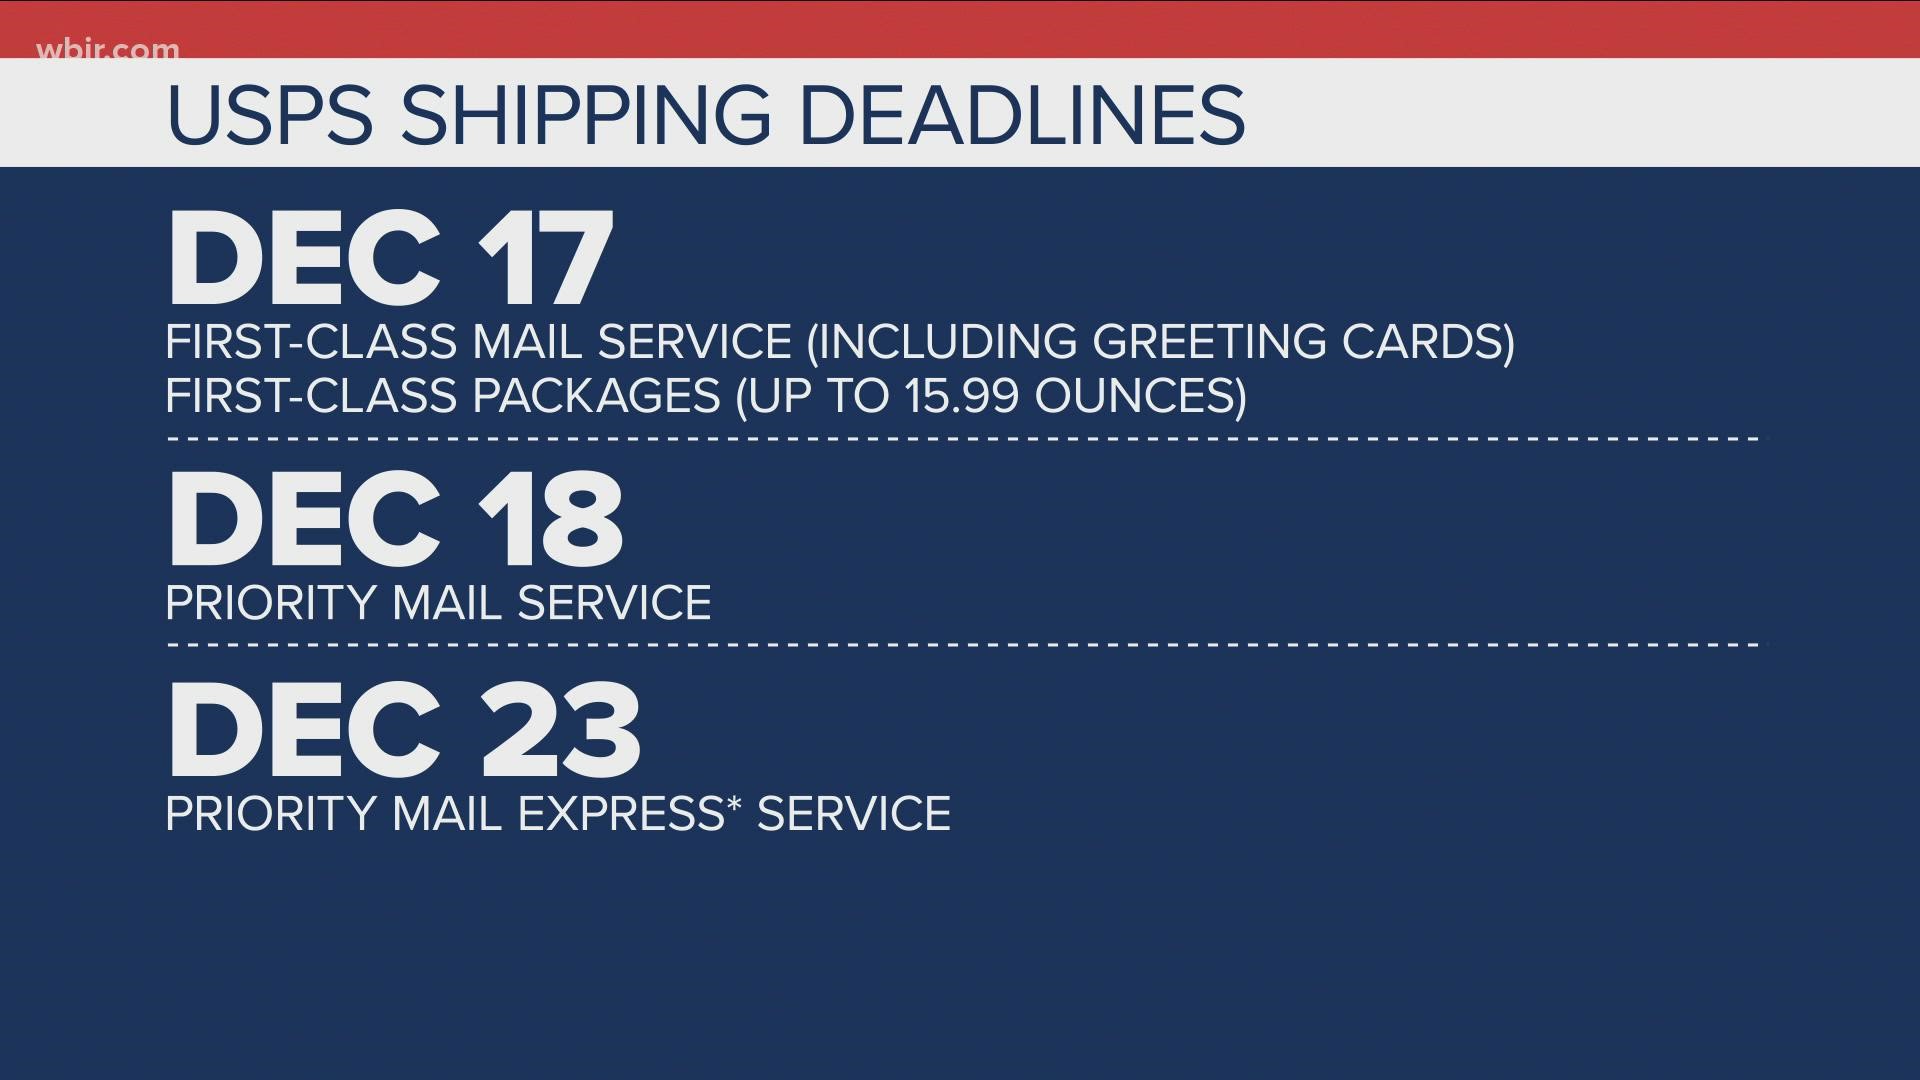 The U.S. postal service says the busiest time of year starts two weeks before Christmas.